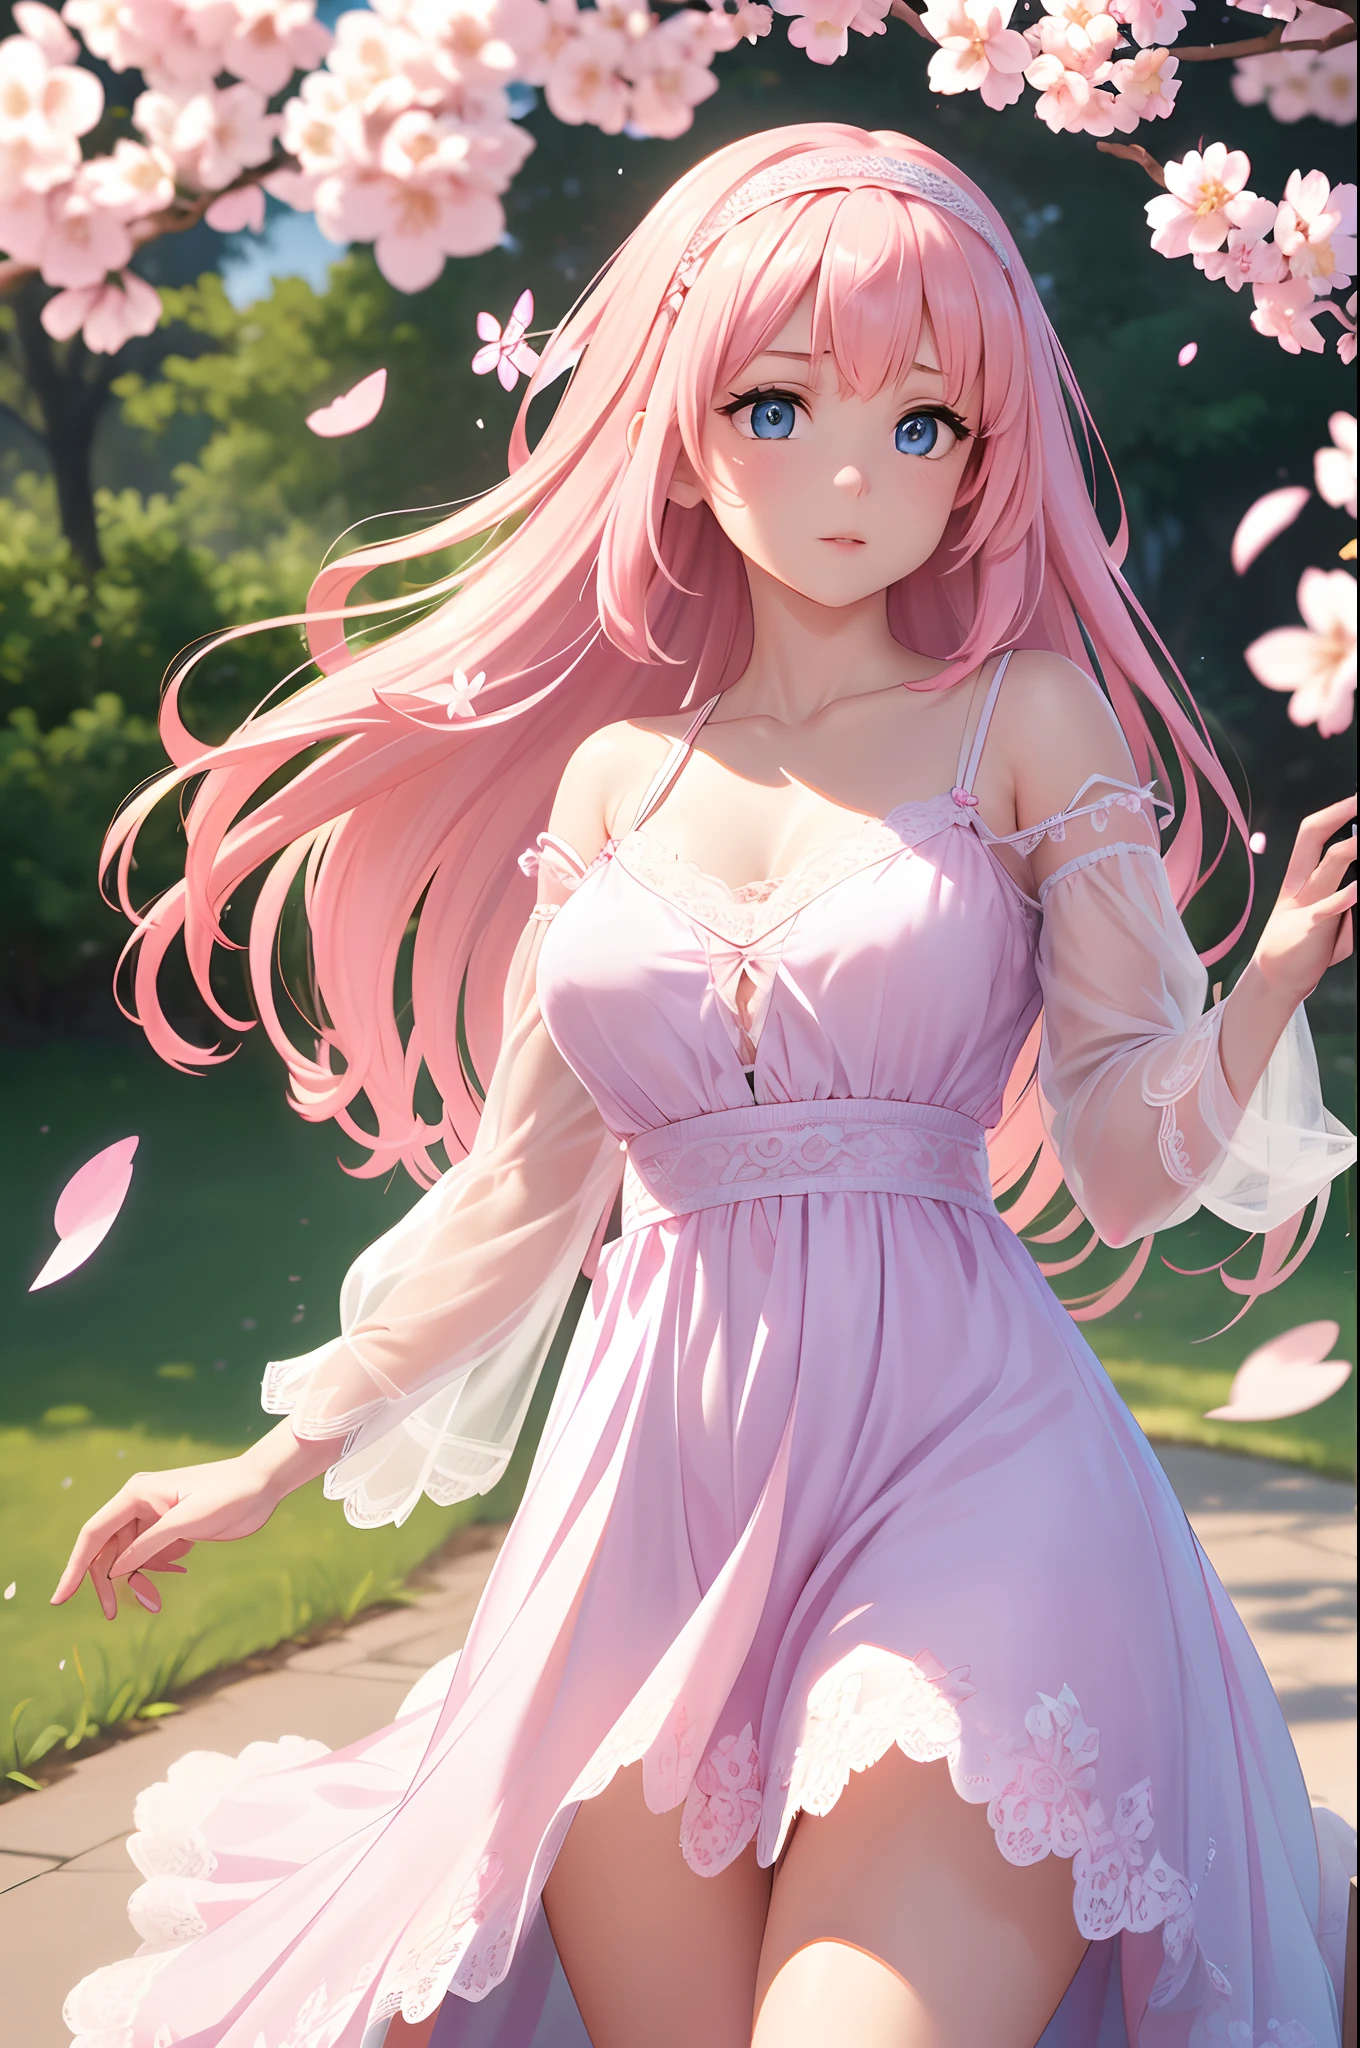 (CG unity 8k wallpaper extremely detailed) (better quality) (better lighting) (an extremely delicate and beautiful) (floating) (beautiful) (spring atmosphere) (1girl) (long pink hair), (hair headband), (detailed and beautiful blue eyes), ((very short white dress, pink lace underside), (lace), ((light transparent silk))), (cherry blossom petals), (butterflies), (dof), (volumetric light) cinematic lighting, chromatic aberration, Sony FE GM, textured skin, high details, highres, 8k